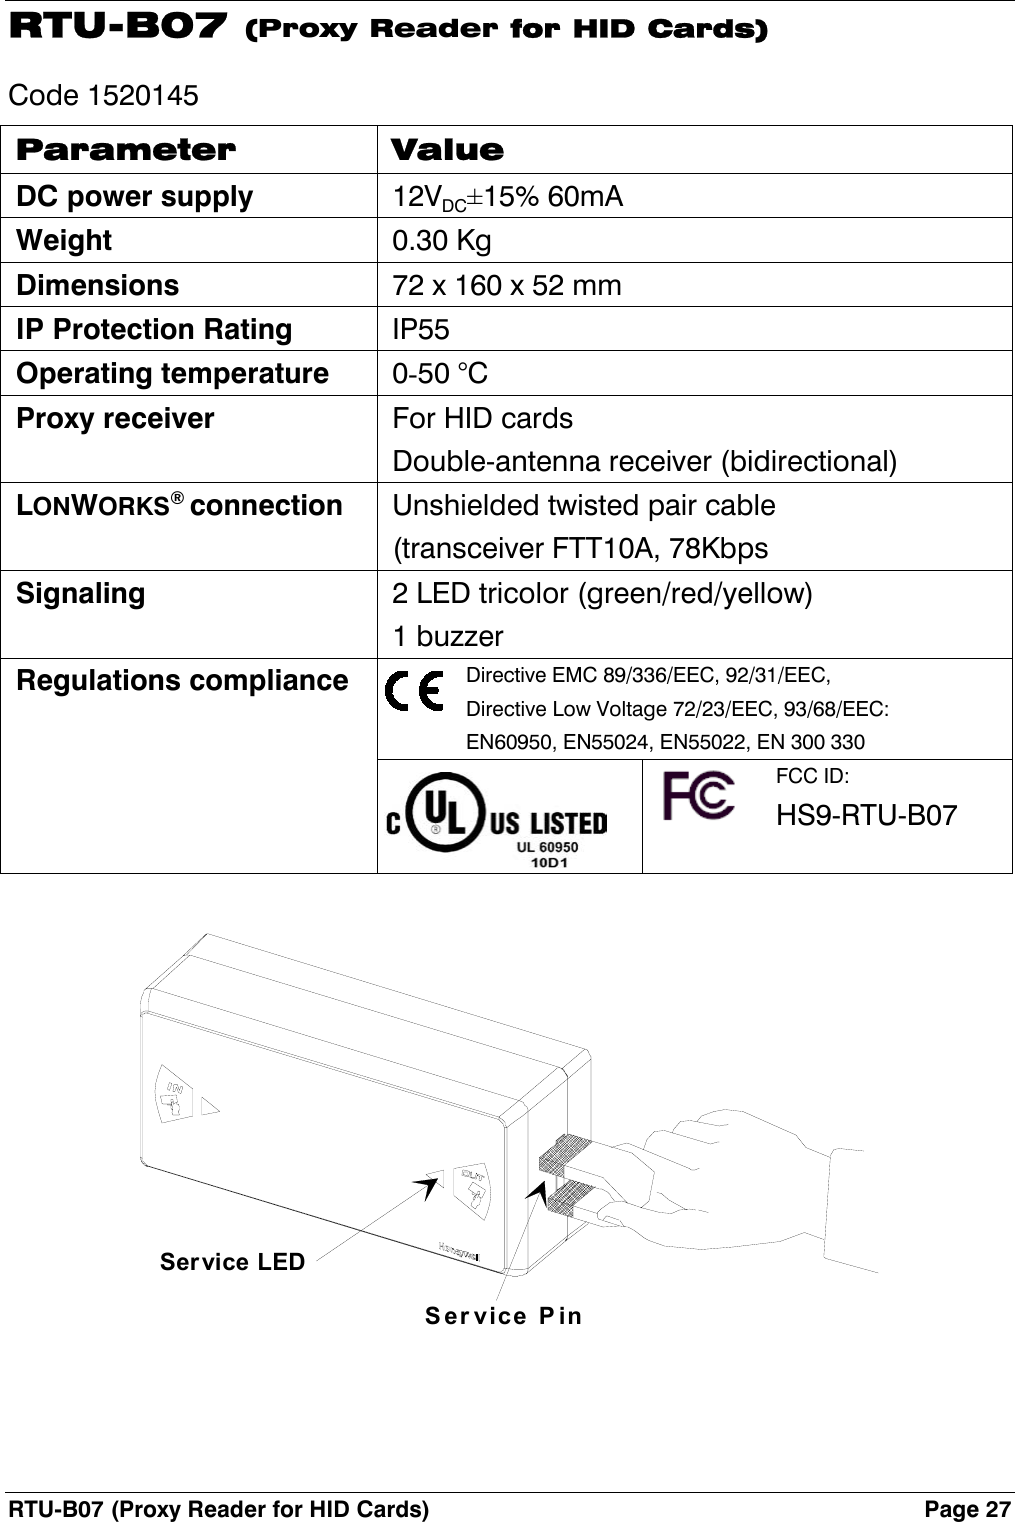 RTU-B07 (Proxy Reader for HID Cards)  Page 27 RTU-B07 (Proxy Reader for HID Cards) Code 1520145 Parameter Value DC power supply 12VDC±15% 60mA Weight 0.30 Kg Dimensions  72 x 160 x 52 mm IP Protection Rating IP55 Operating temperature 0-50 °C Proxy receiver  For HID cards Double-antenna receiver (bidirectional) LONWORKS® connection  Unshielded twisted pair cable (transceiver FTT10A, 78Kbps Signaling  2 LED tricolor (green/red/yellow) 1 buzzer Regulations compliance  Directive EMC 89/336/EEC, 92/31/EEC, Directive Low Voltage 72/23/EEC, 93/68/EEC: EN60950, EN55024, EN55022, EN 300 330    FCC ID: HS9-RTU-B07  Service PinSer vice LED  